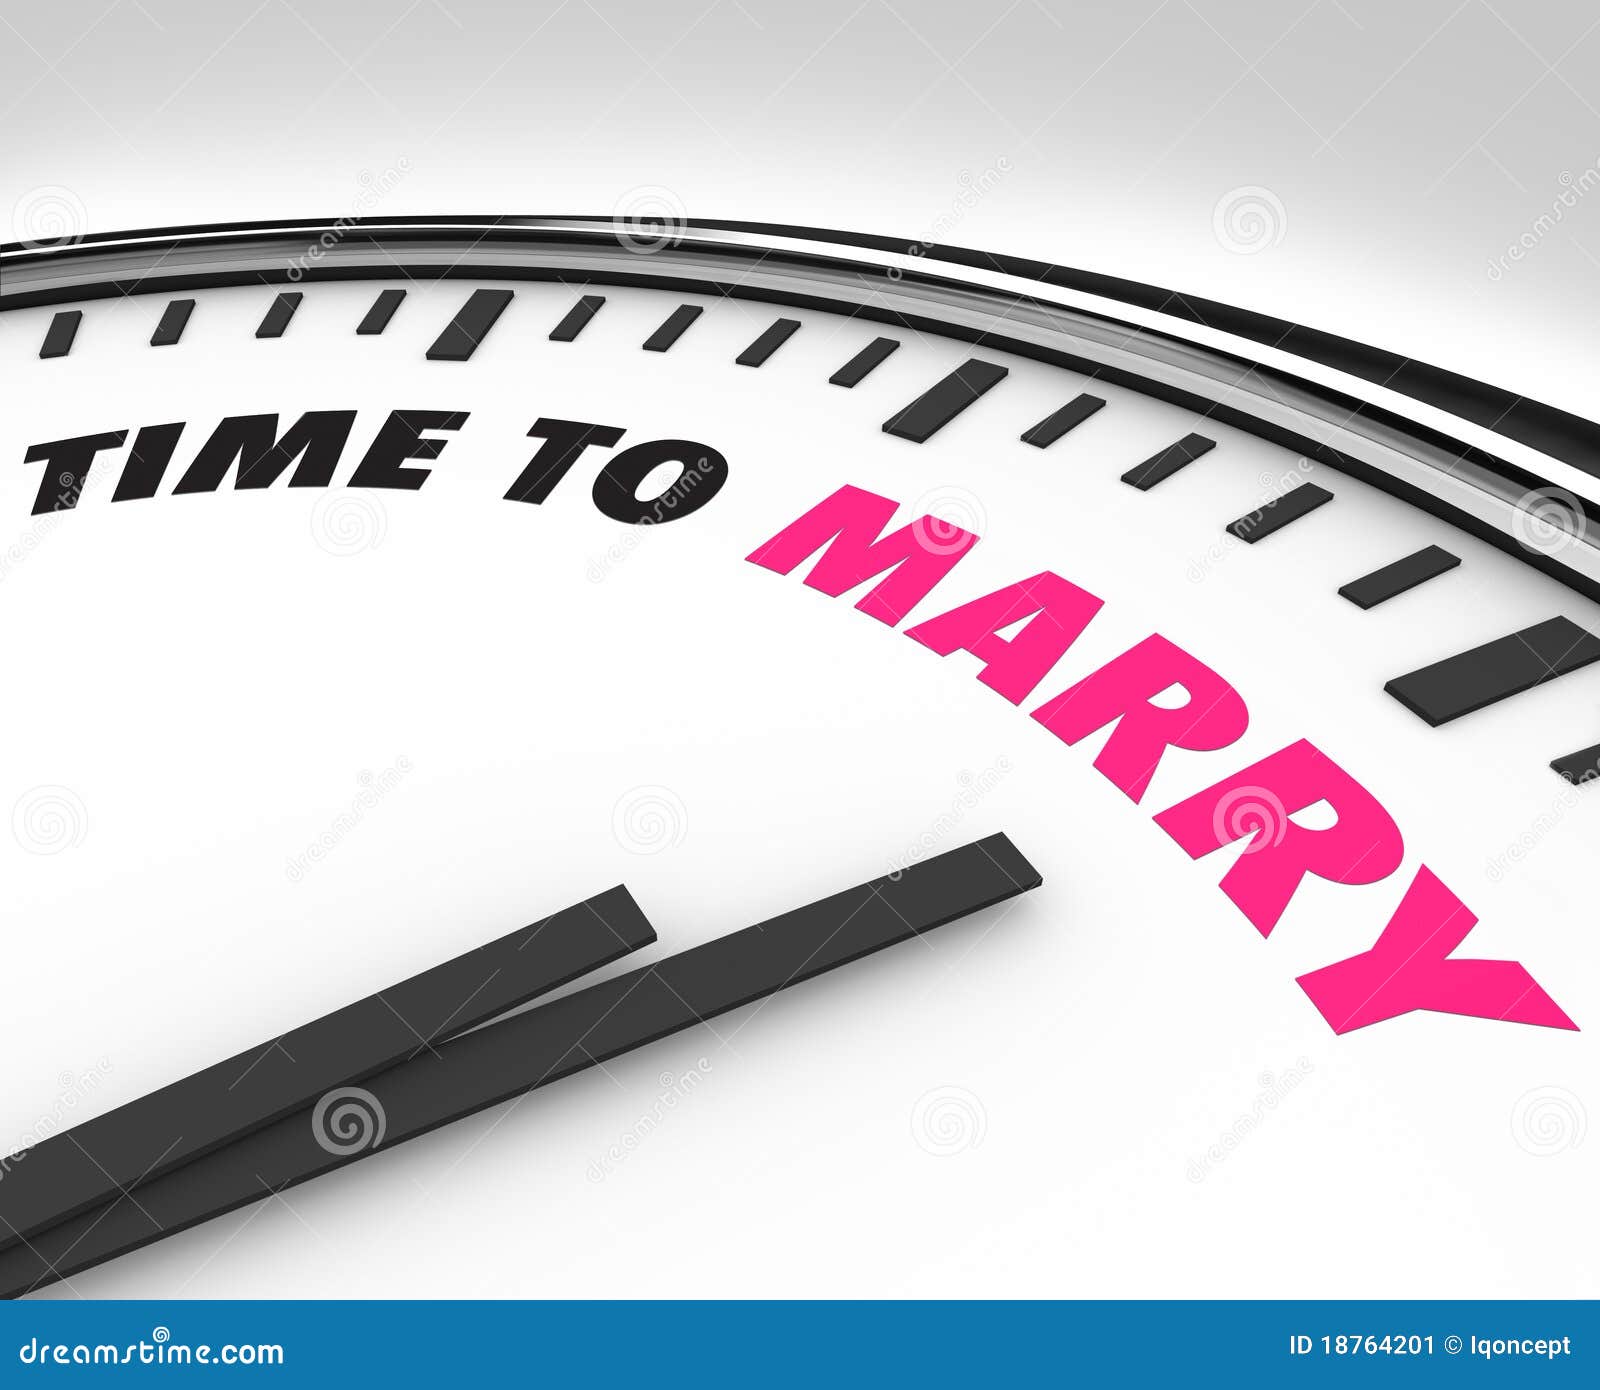 Time To Marry - Clock for Wedding Stock Illustration - of bond: 18764201